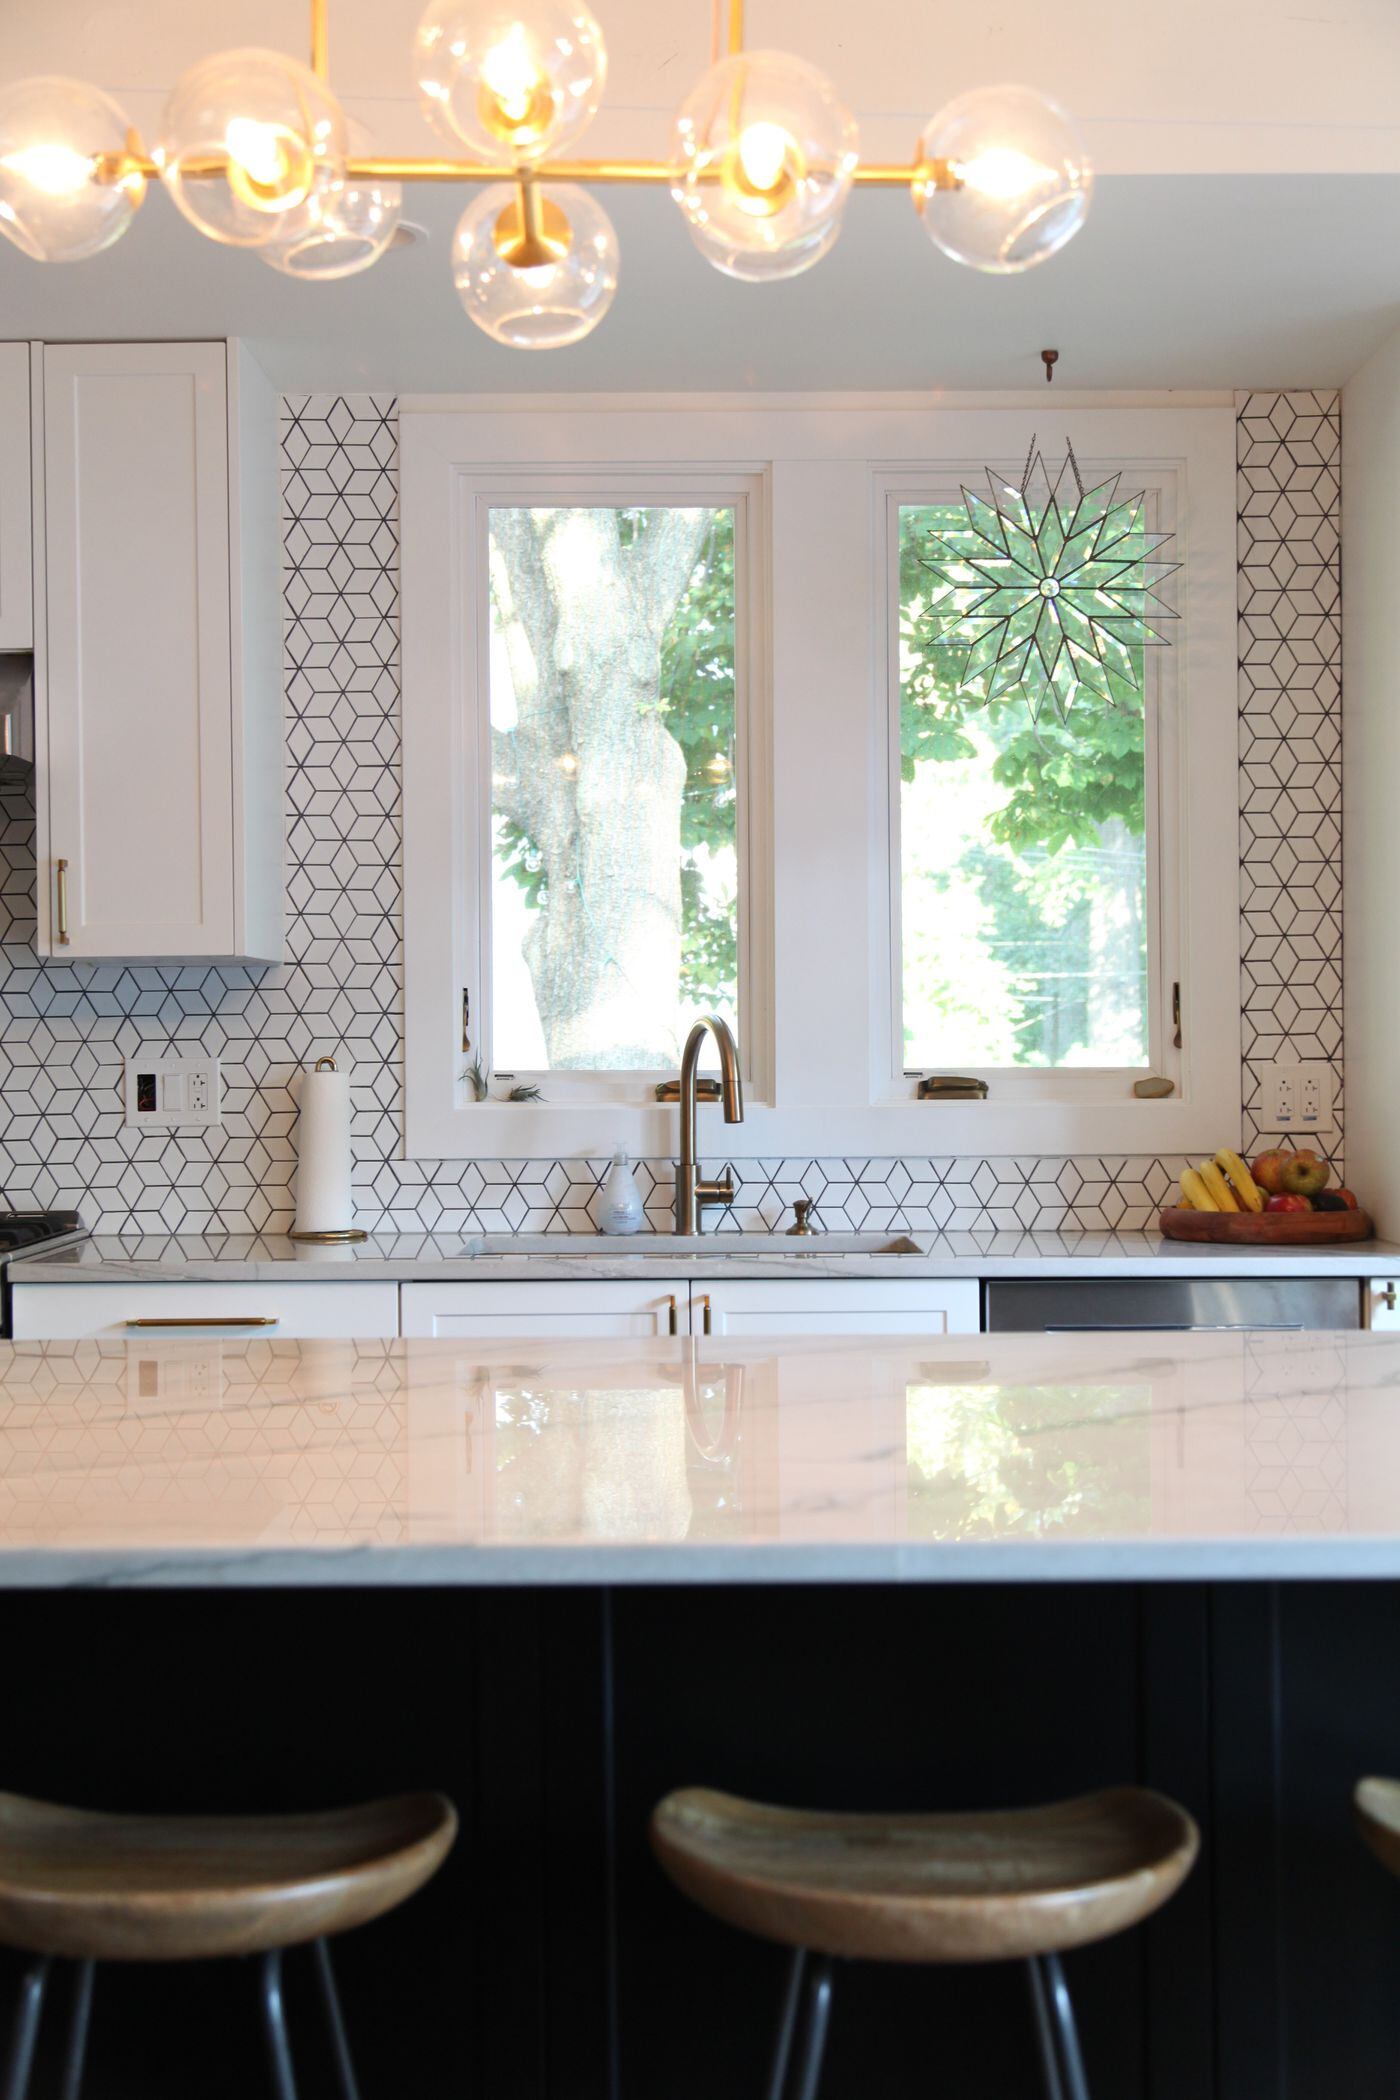 How Kitchen Backsplashes And Bathroom Tile Can Make An Artistic Statement